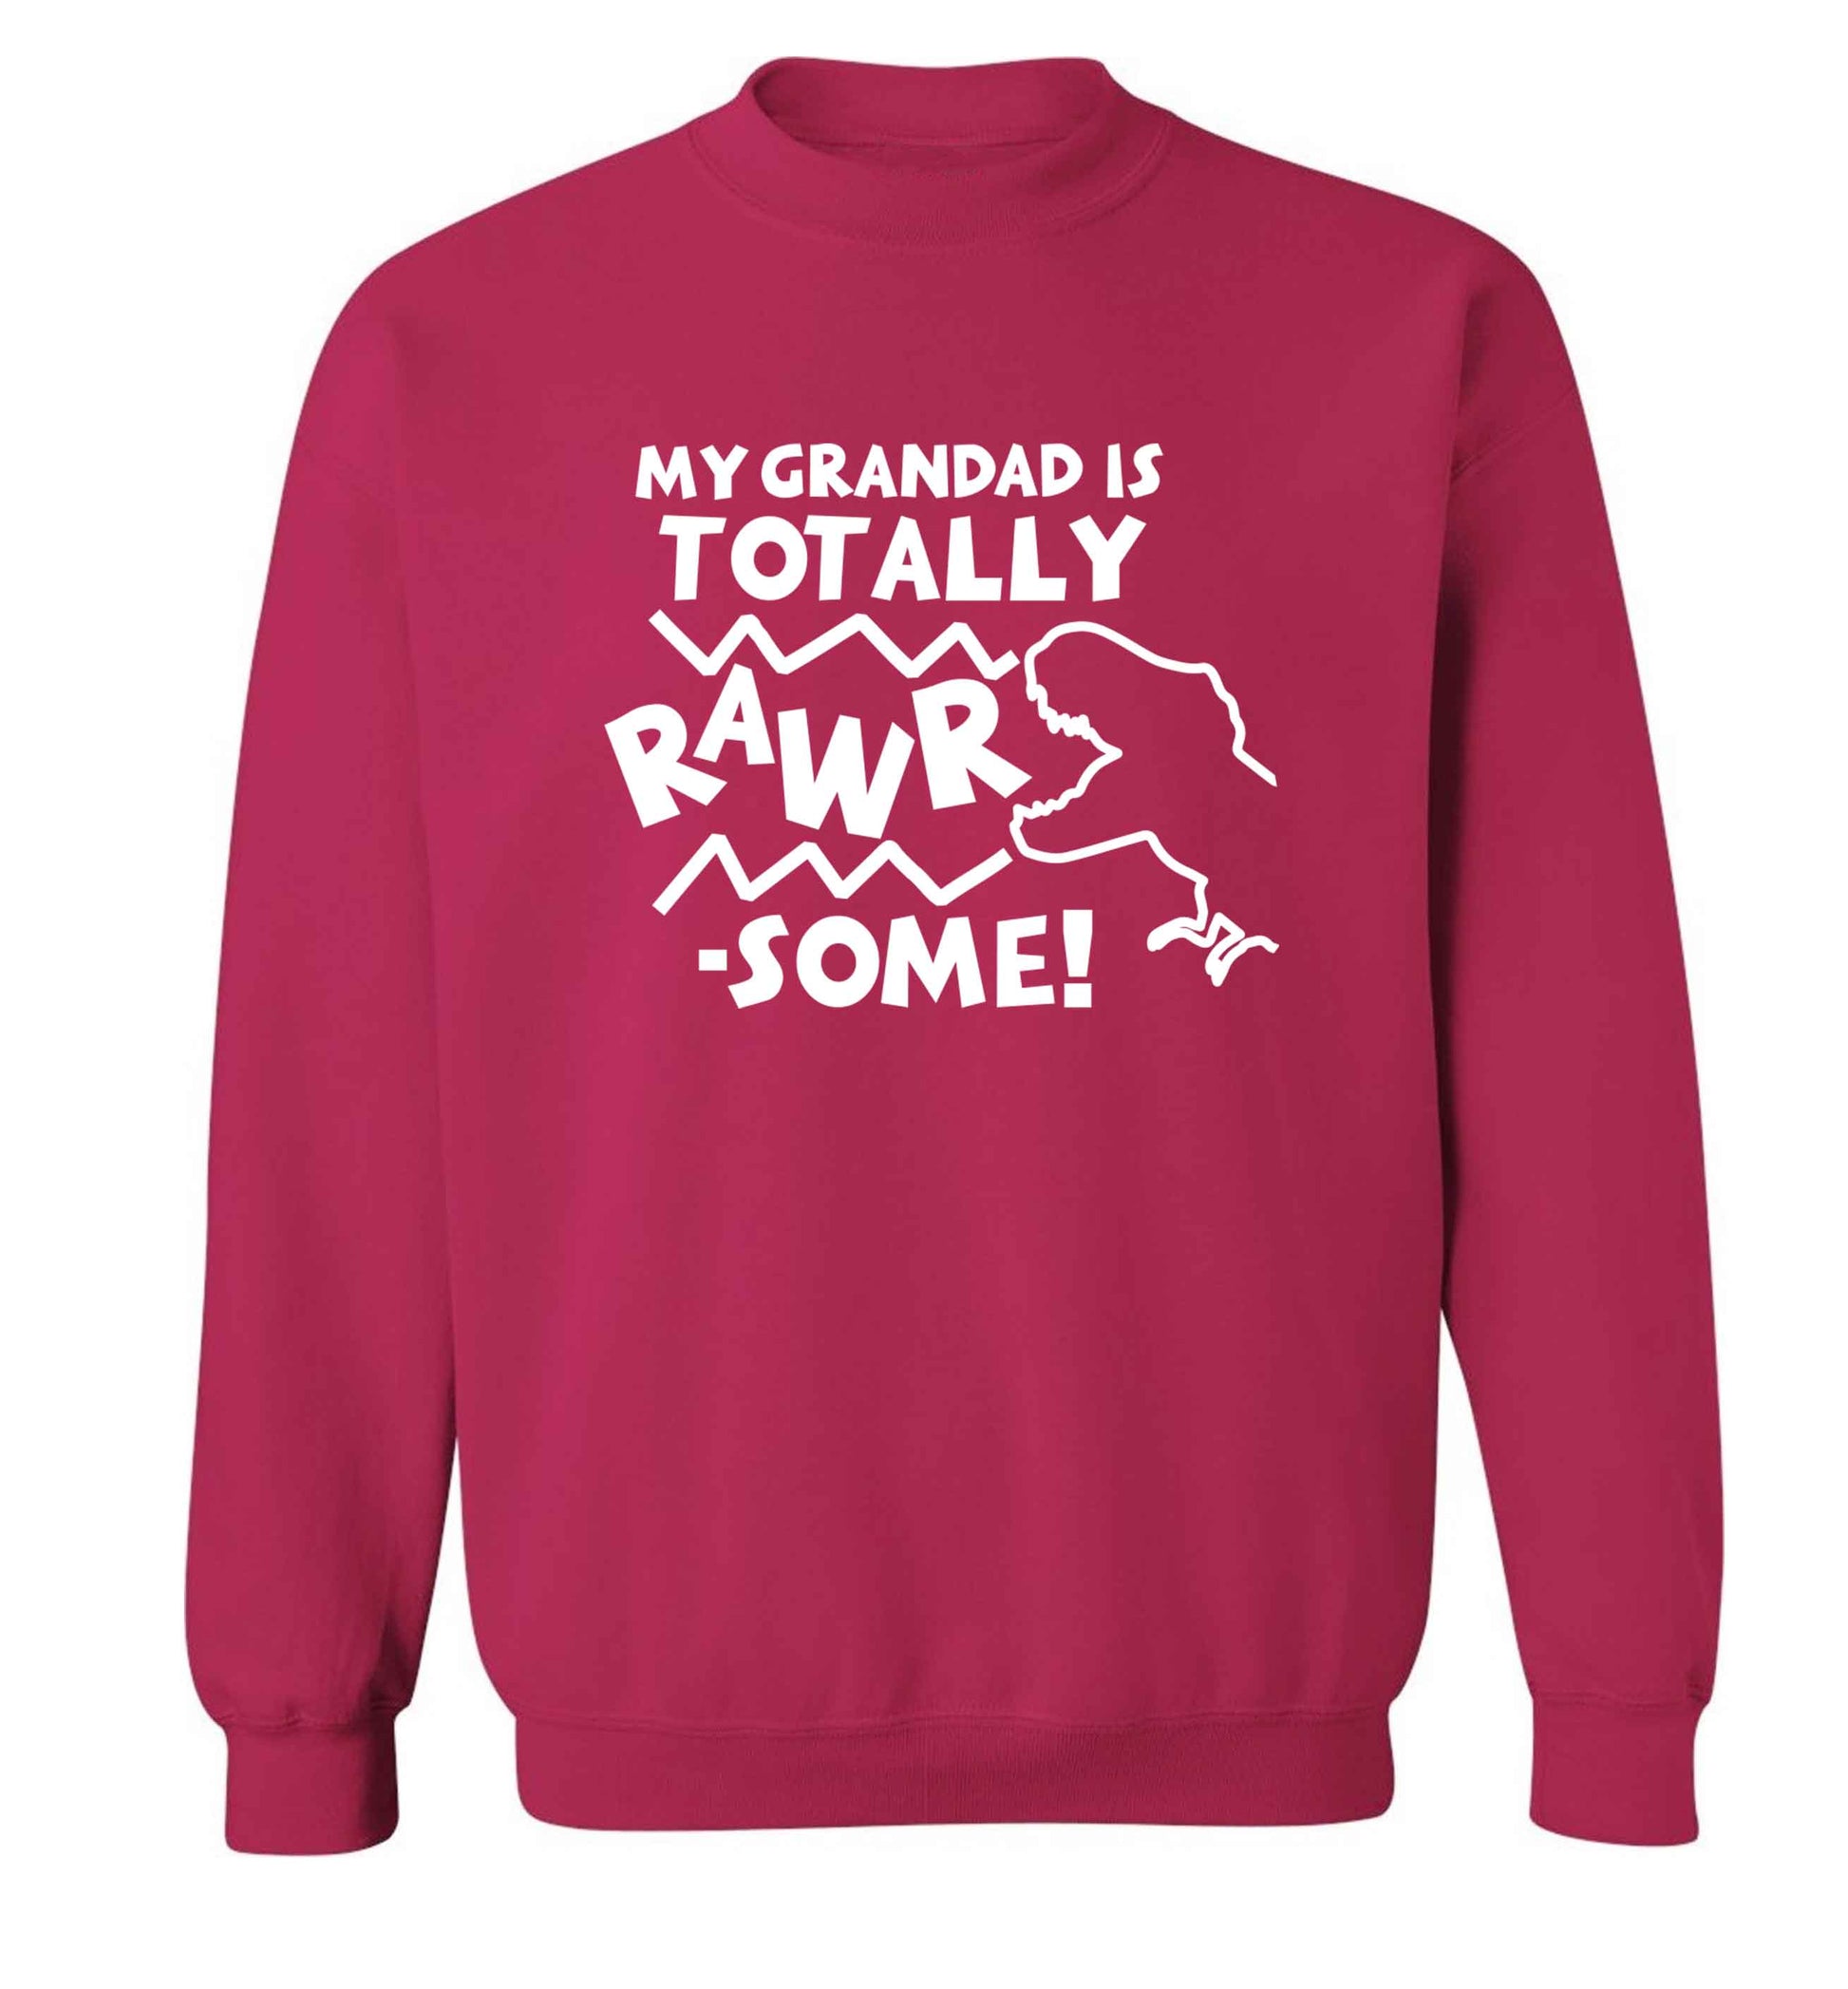 My grandad is totally rawrsome adult's unisex pink sweater 2XL